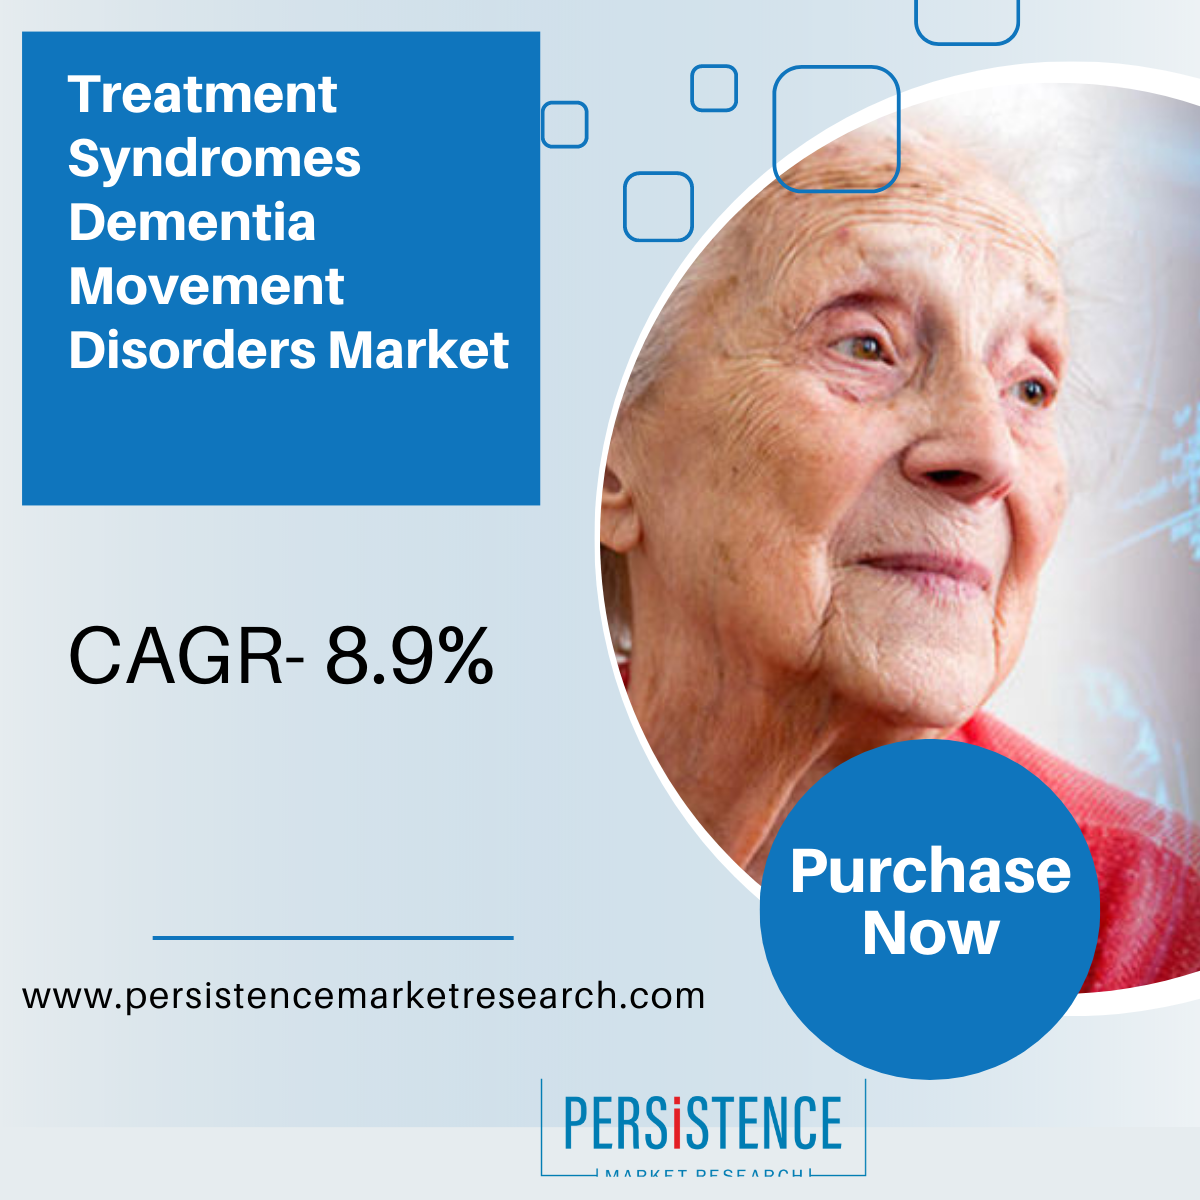 Treatment_Syndromes_Dementia_Movement_Disorders_Market